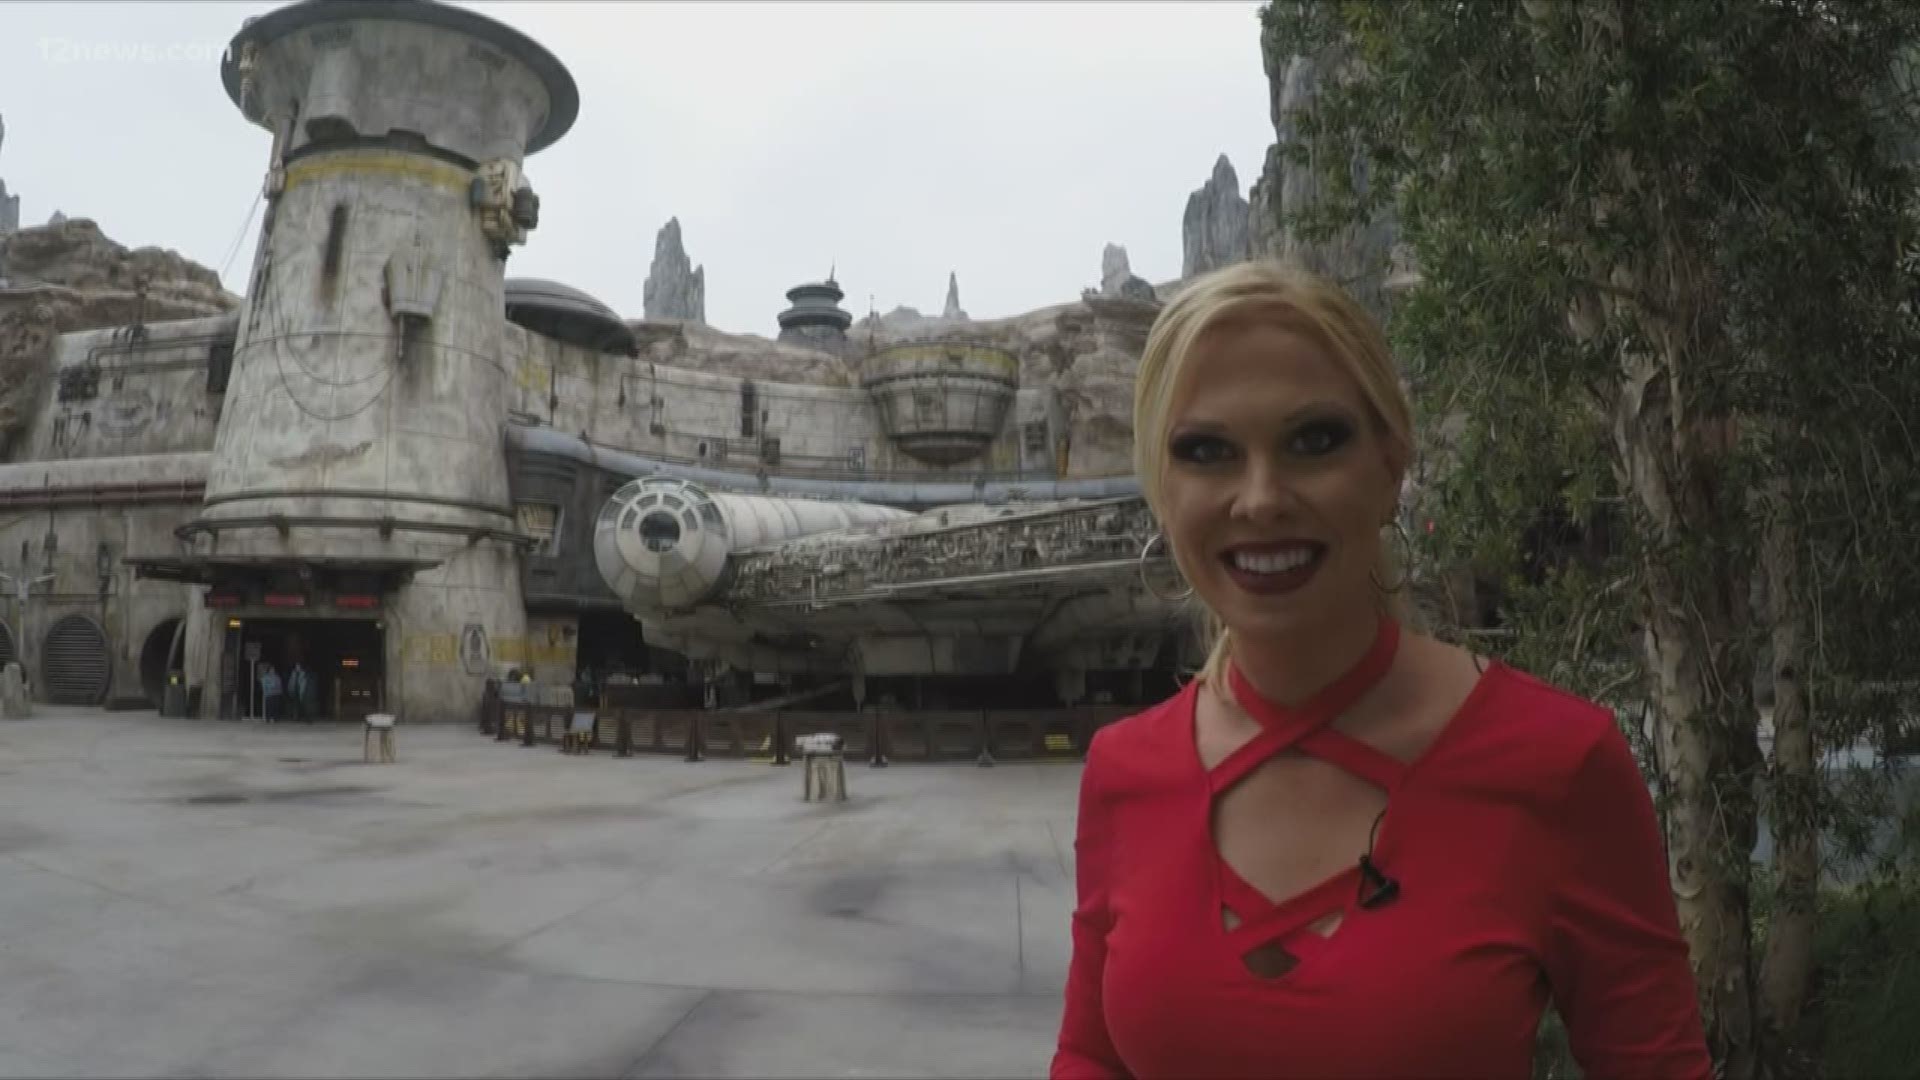 At Disneyland’s Star Wars: Galaxy’s Edge, you can be the pilot, gunner or engineer aboard the Millennium Falcon for a thrilling interactive smuggling mission. After you jump into hyperspace, the fastest hunk of junk in the galaxy will take you on an adventure with danger around every turn.